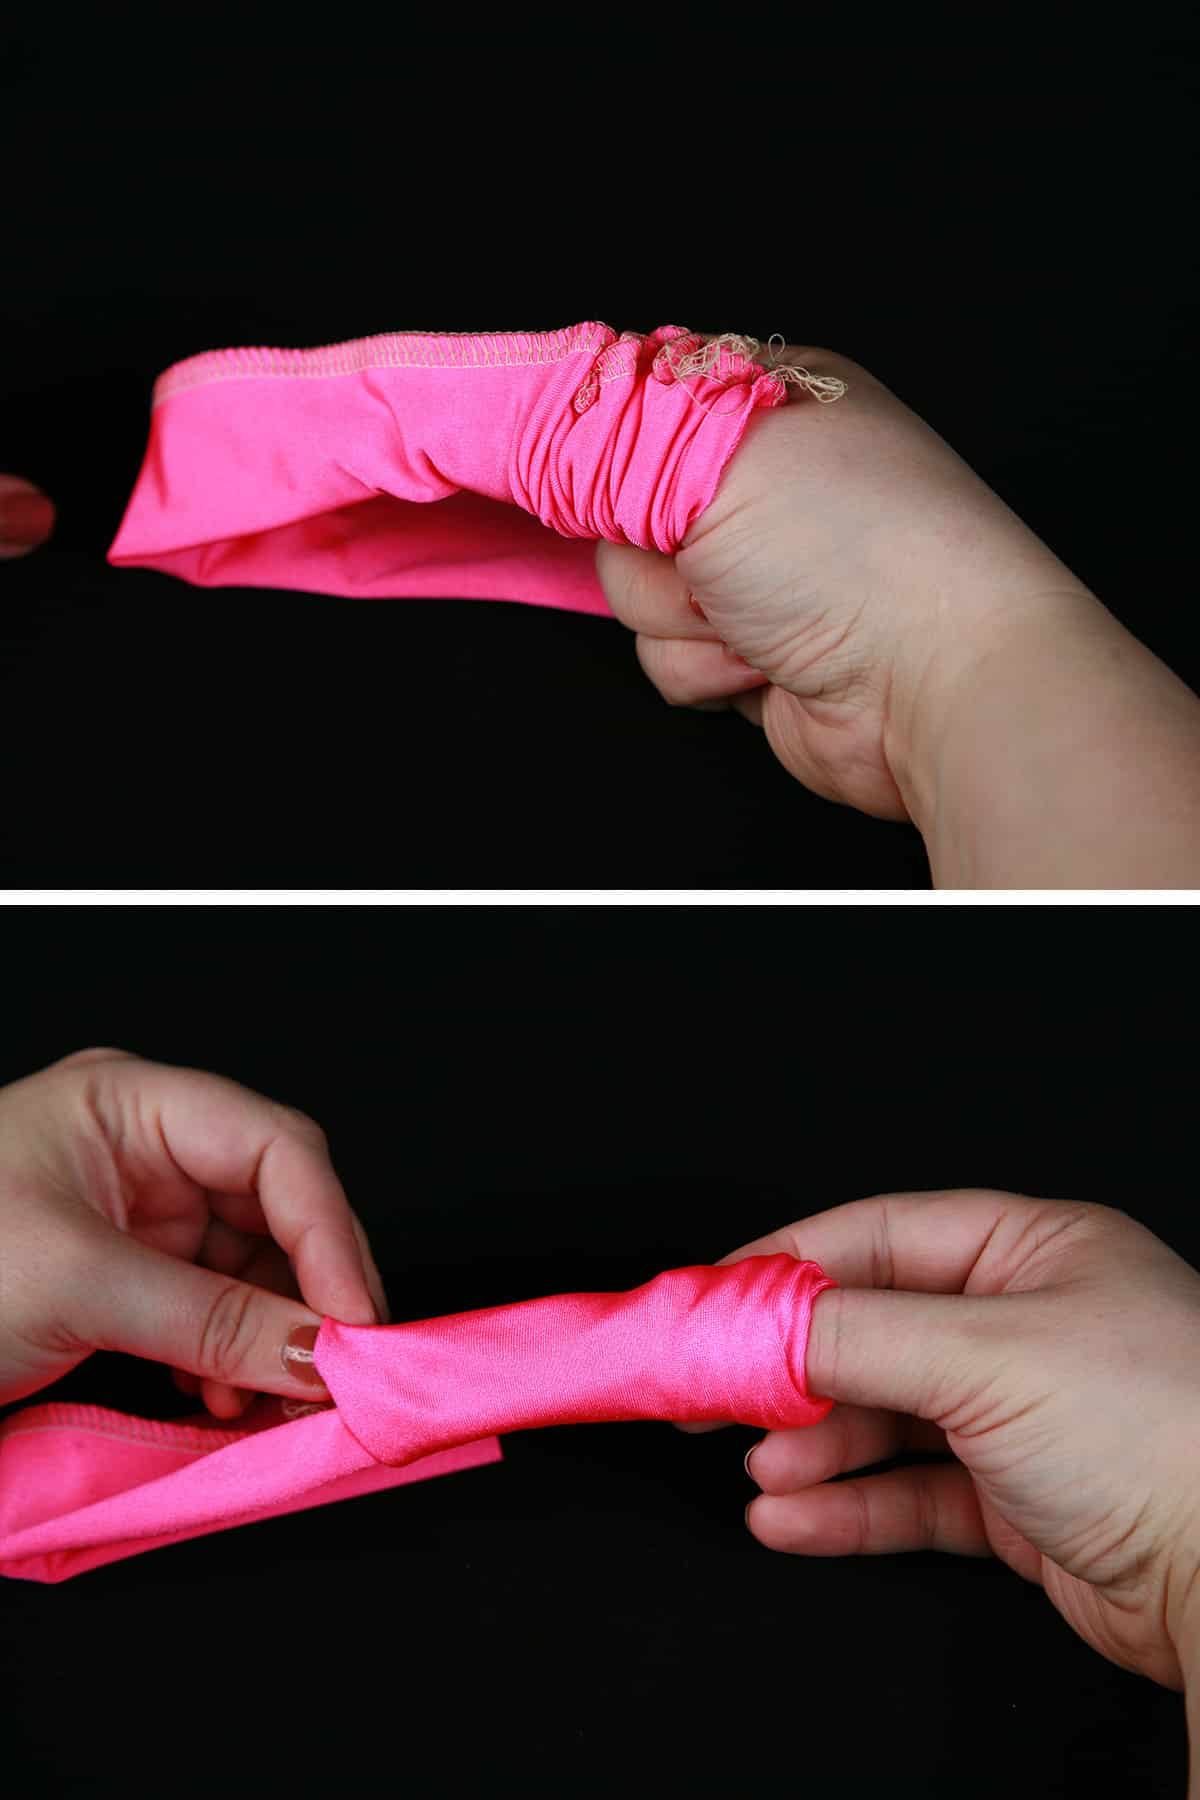 A 2 part compilation image, showing a pair of hands turning a tube of hot pink spandex inside out.